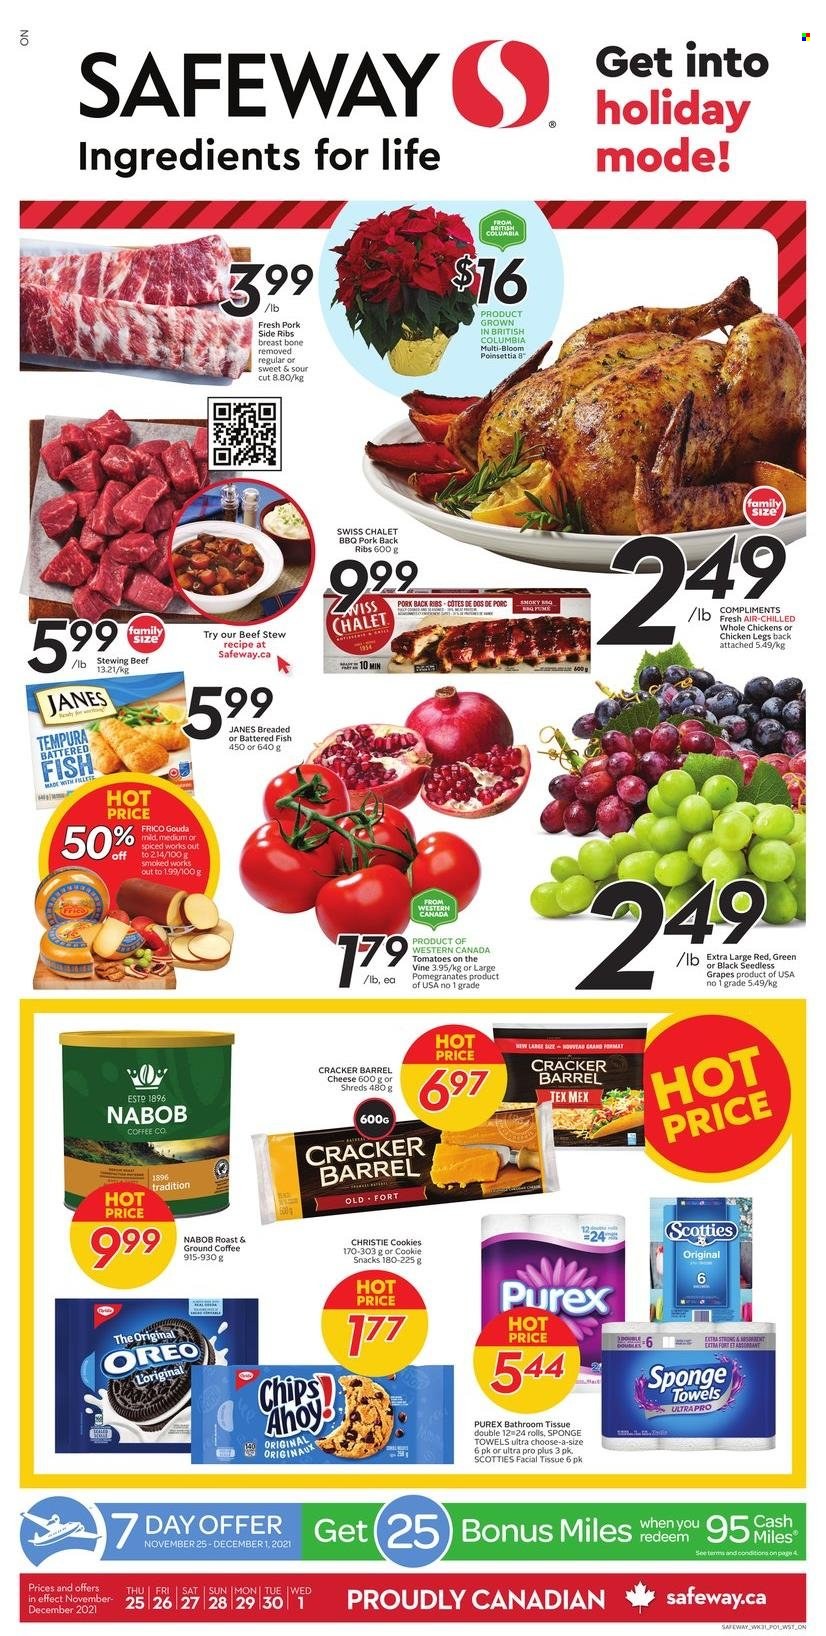 thumbnail - Safeway Flyer - November 25, 2021 - December 01, 2021 - Sales products - tomatoes, grapes, seedless grapes, fish, gouda, cheese, cookies, snack, crackers, coffee, ground coffee, whole chicken, chicken legs, chicken, beef meat, stewing beef, pork meat, pork ribs, pork back ribs, bath tissue, Purex, poinsettia, Oreo, chips. Page 1.